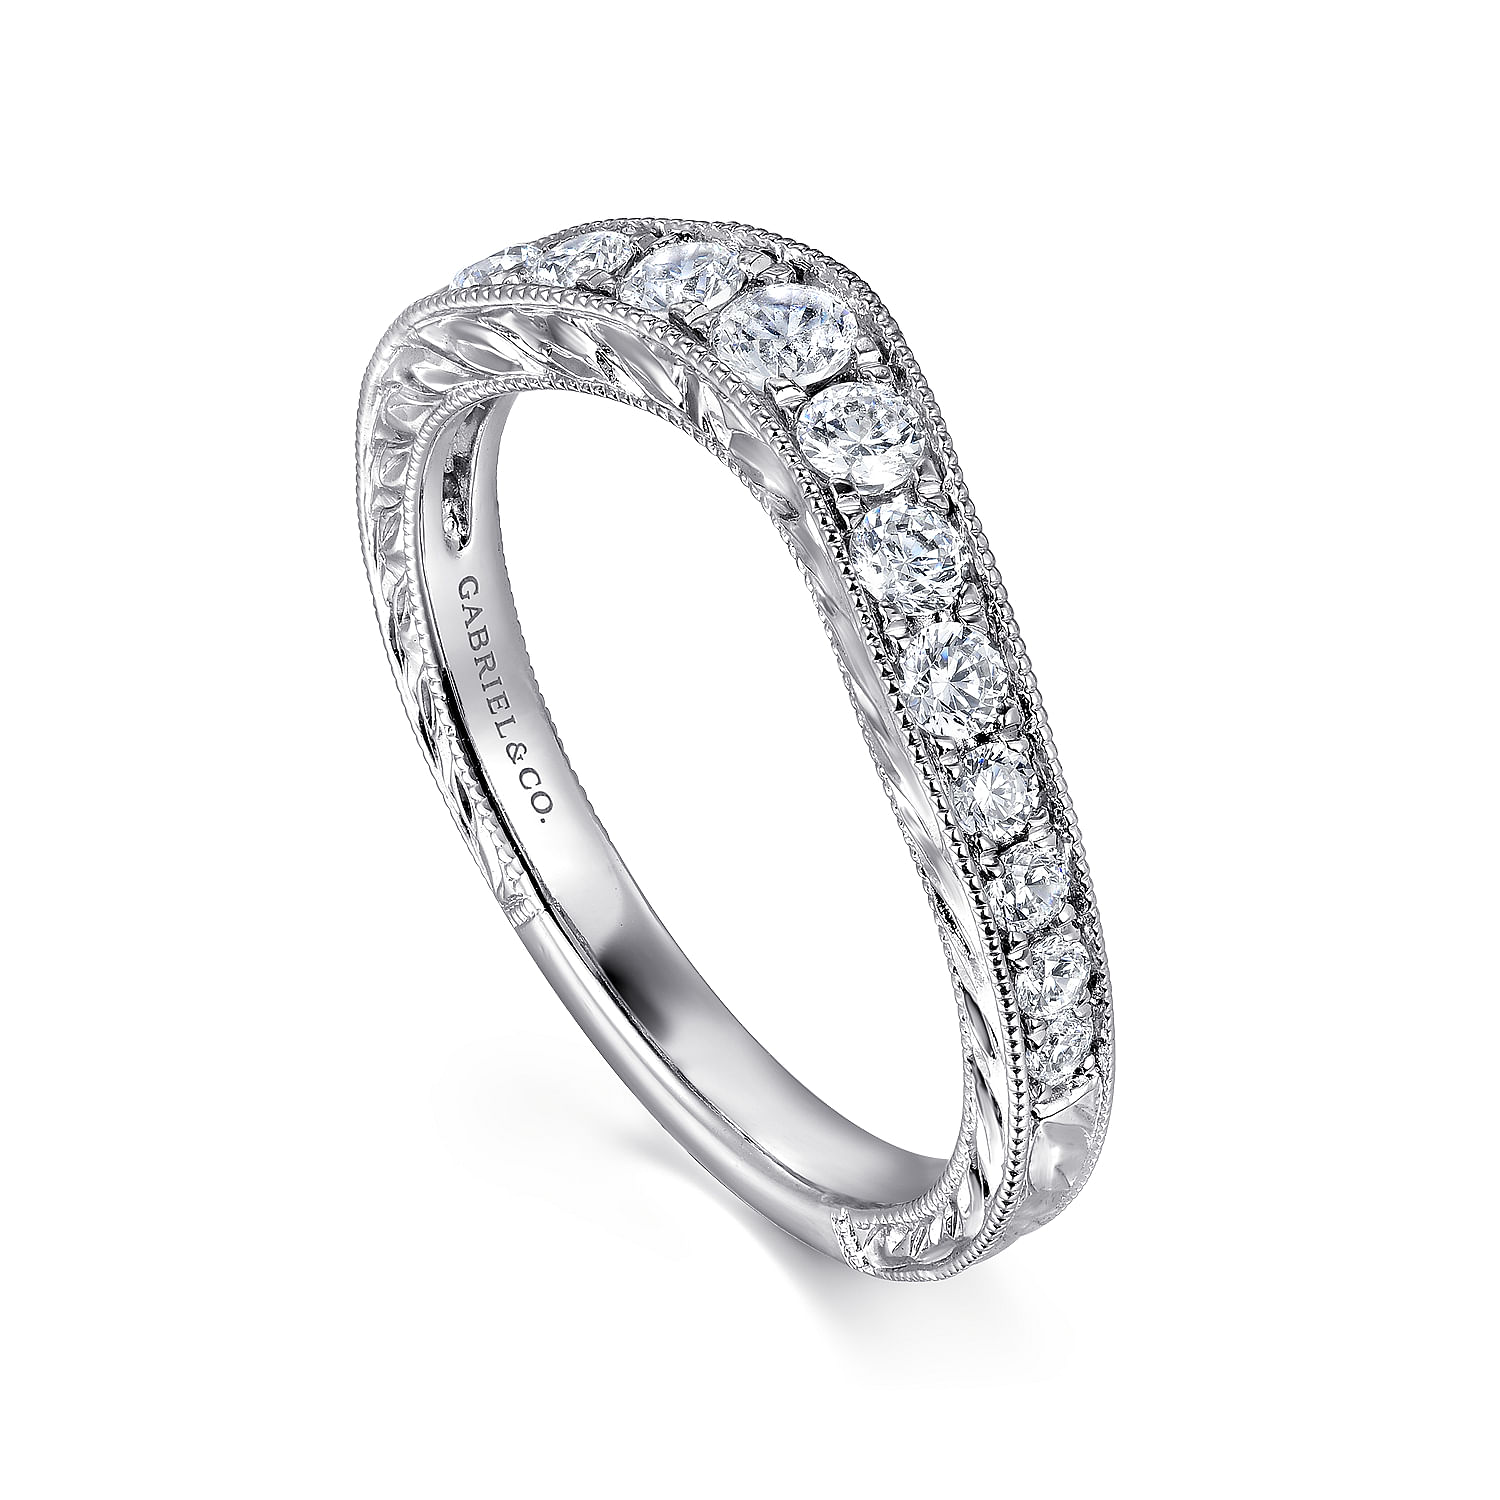 Vintage Inspired Platinum Curved Channel Set Diamond Wedding Band with Engraving